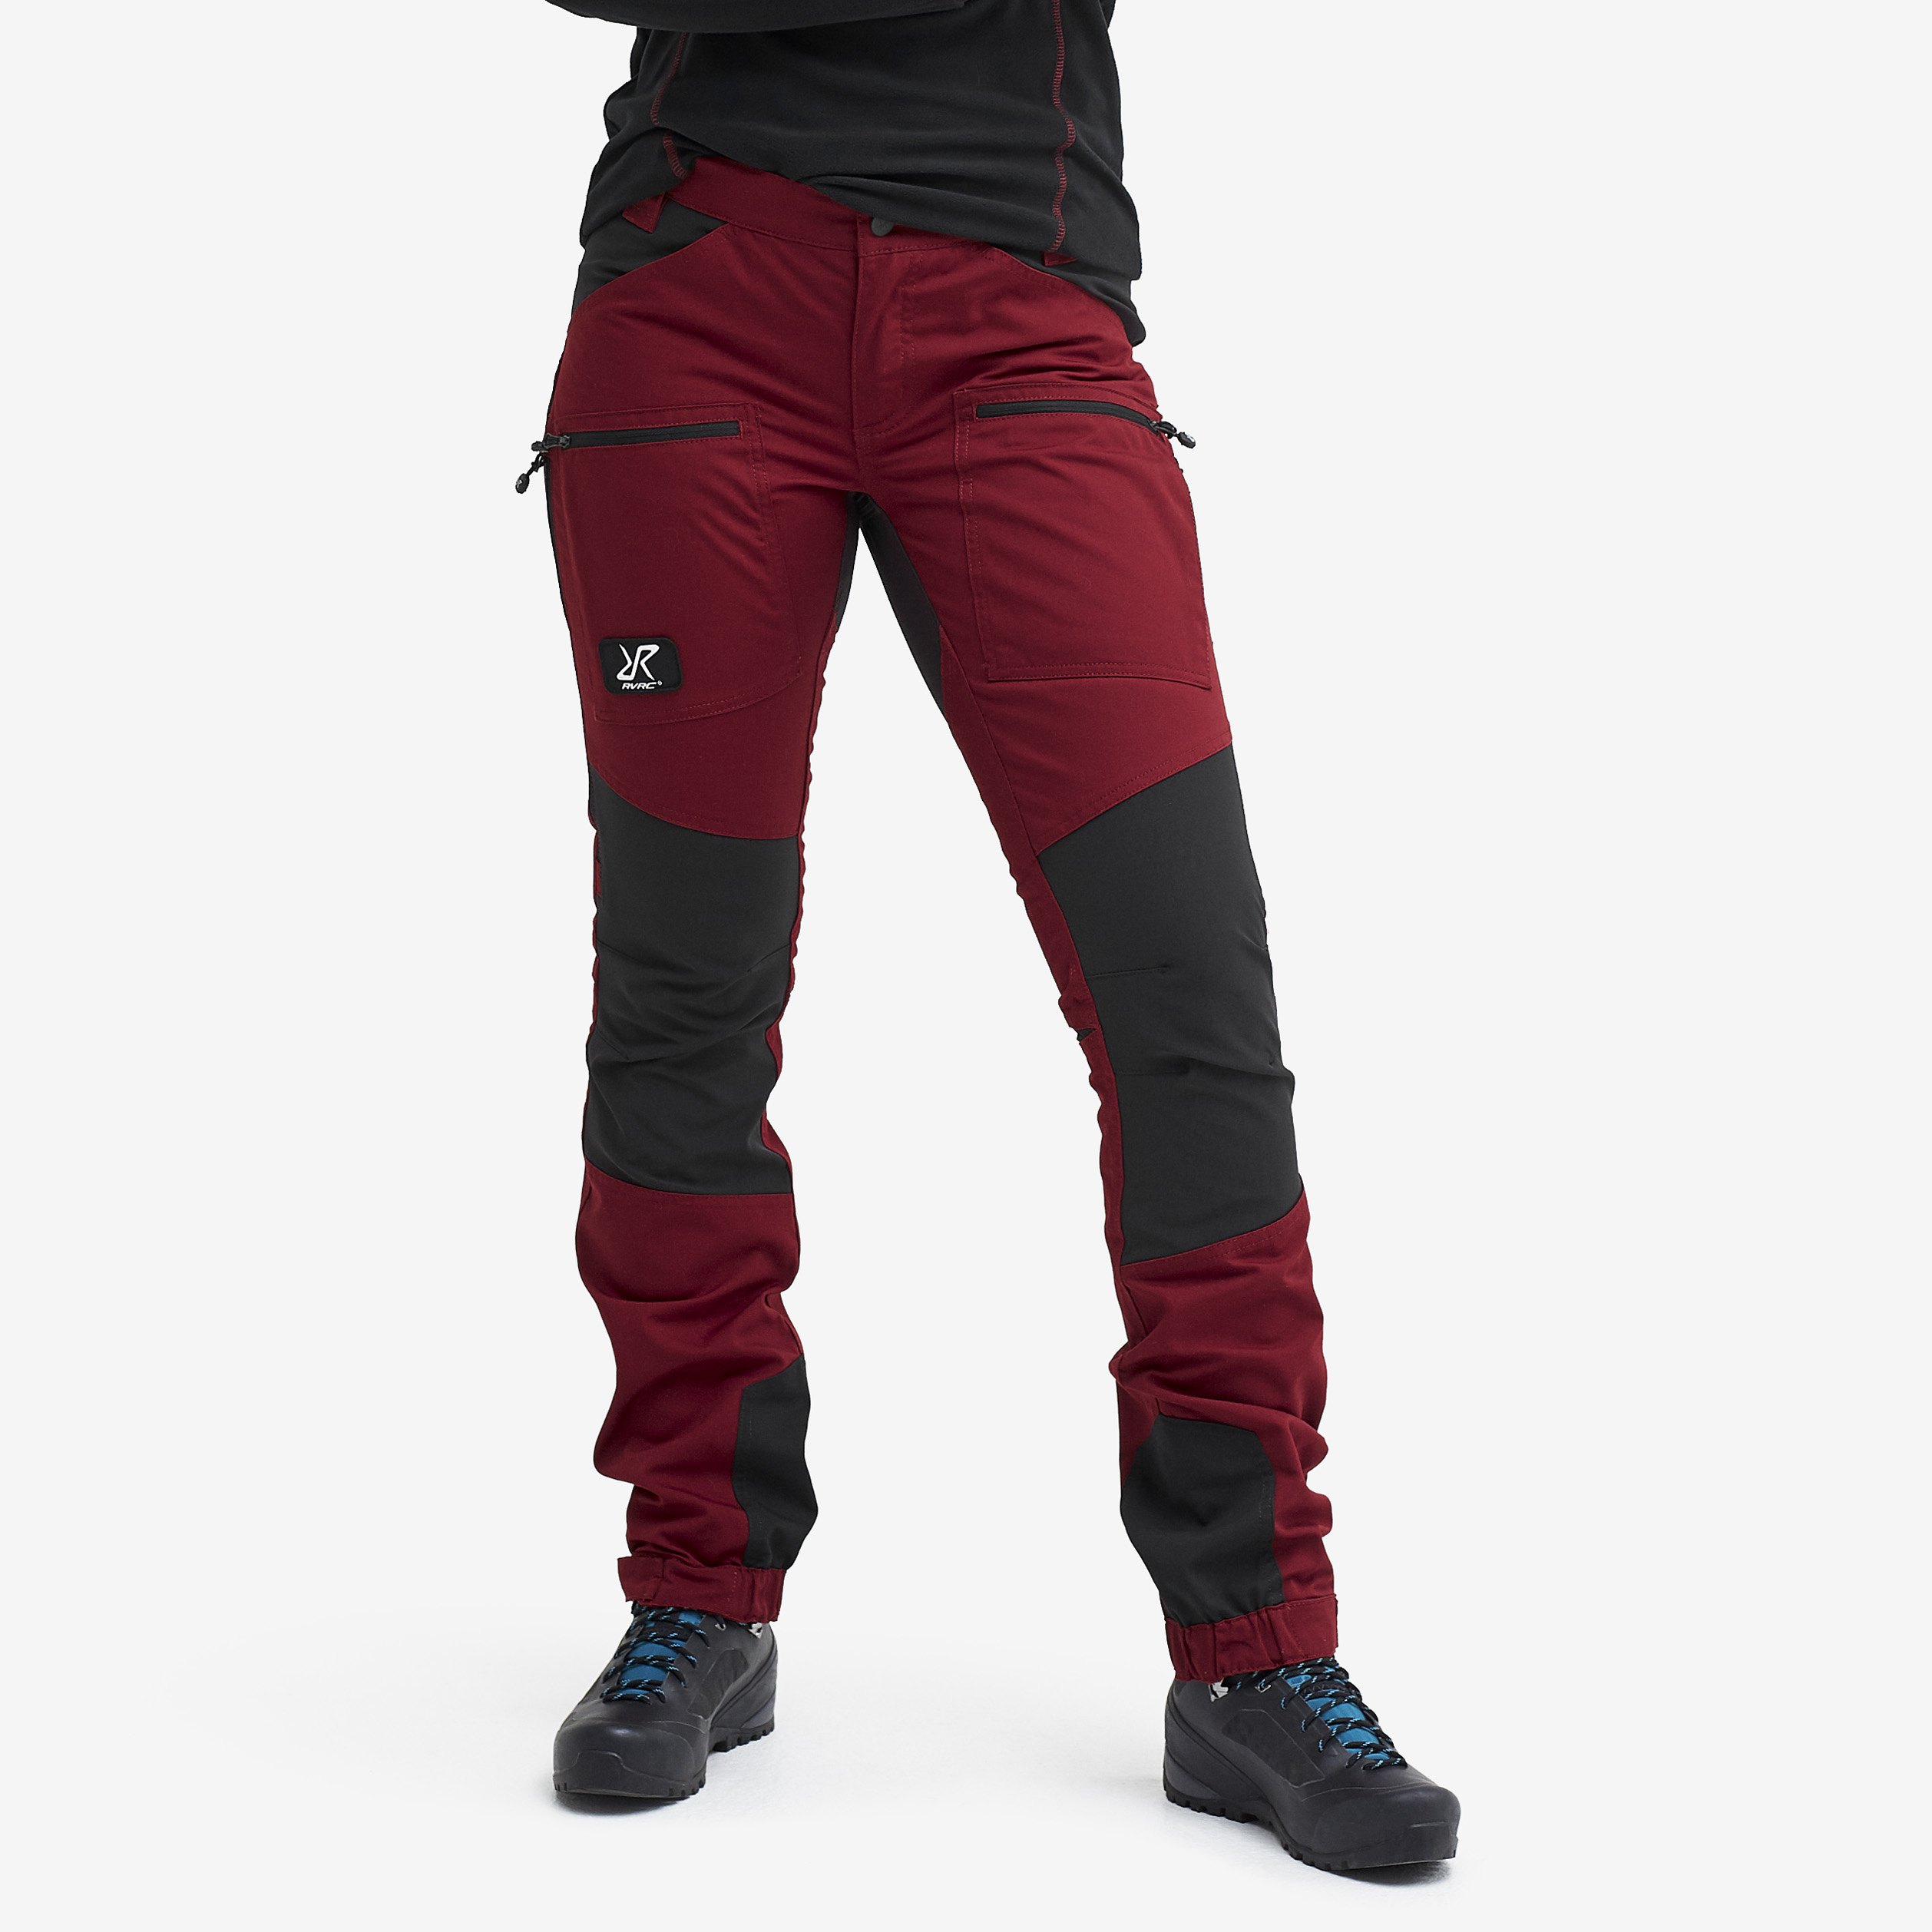 Nordwand Pro Pants Wine Red Dame